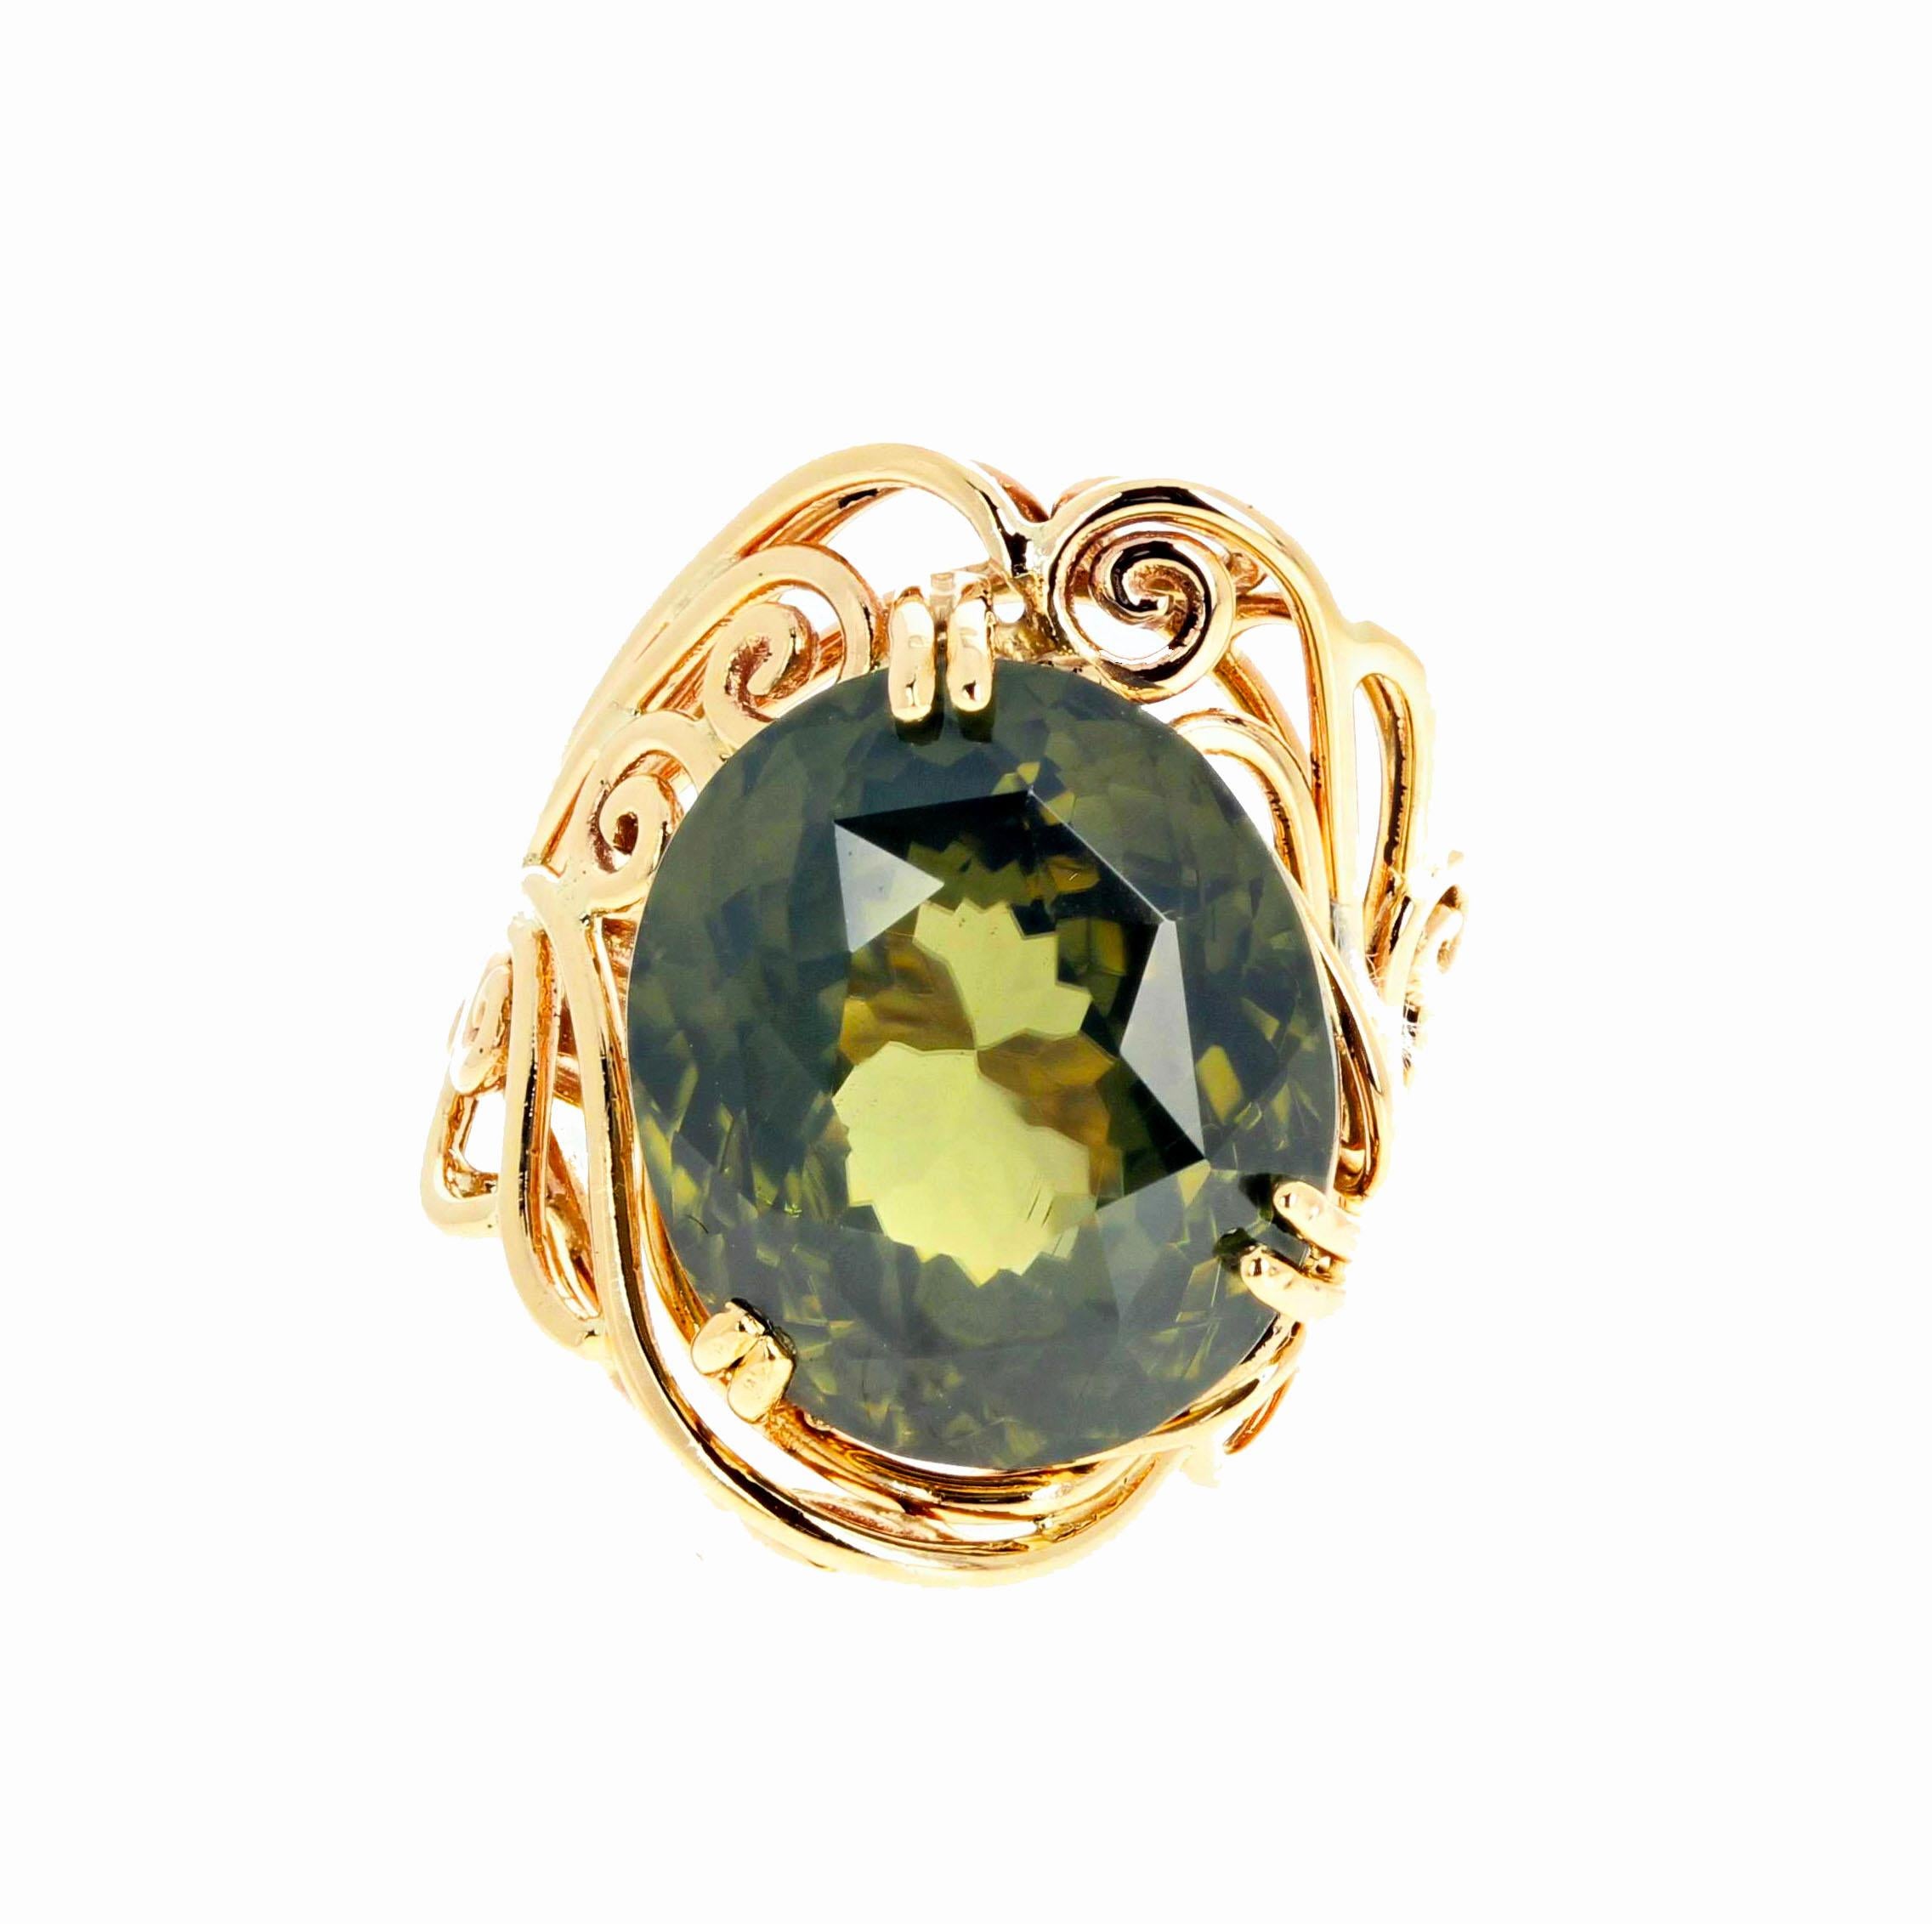 AJD Rare ENORMOUS Gemstone 19.4 Ct Natural Green Zircon Yellow Gold Ring In New Condition For Sale In Raleigh, NC